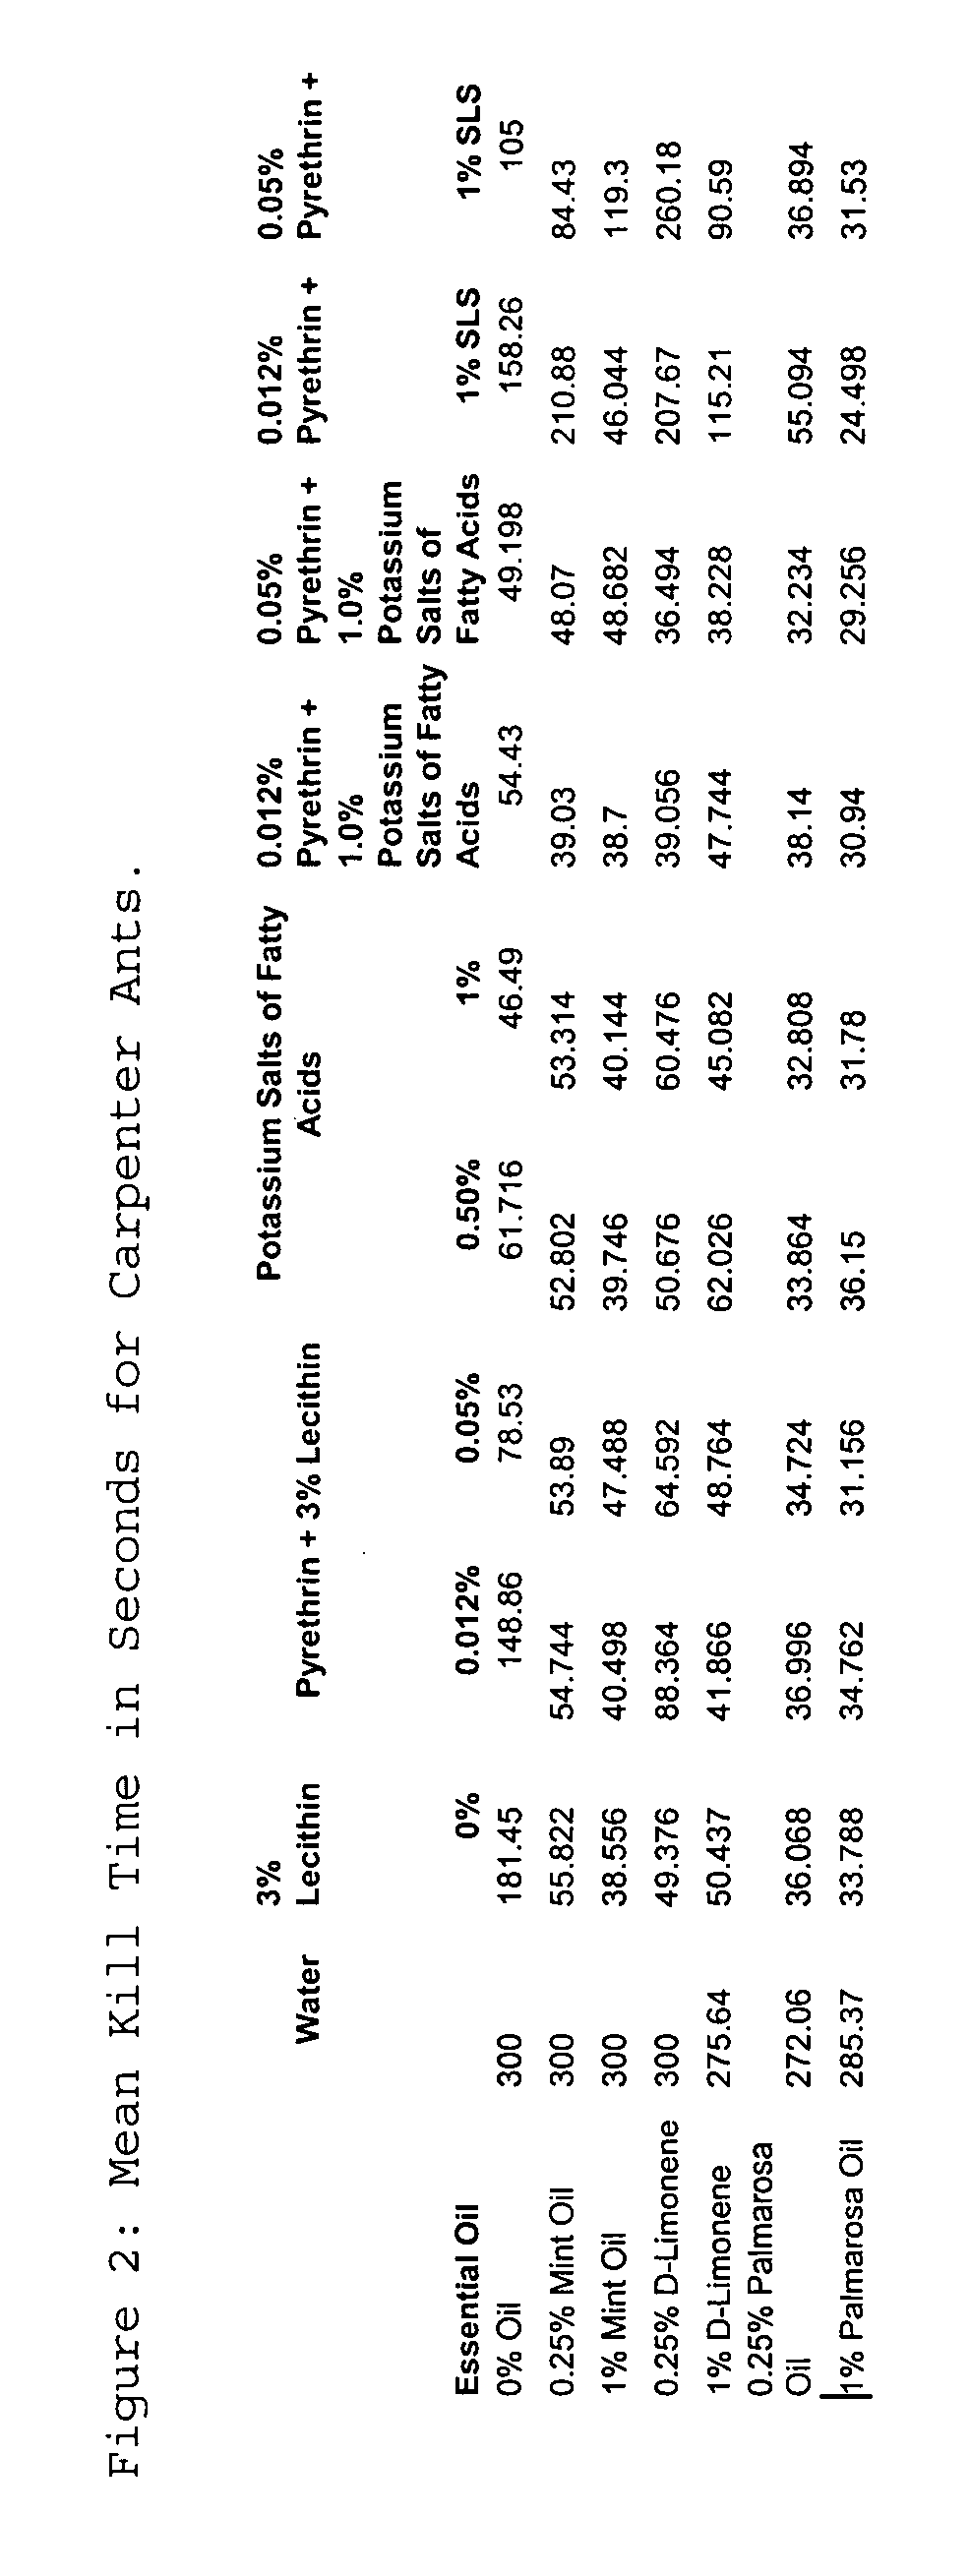 Insecticidal compositions and methods of using same